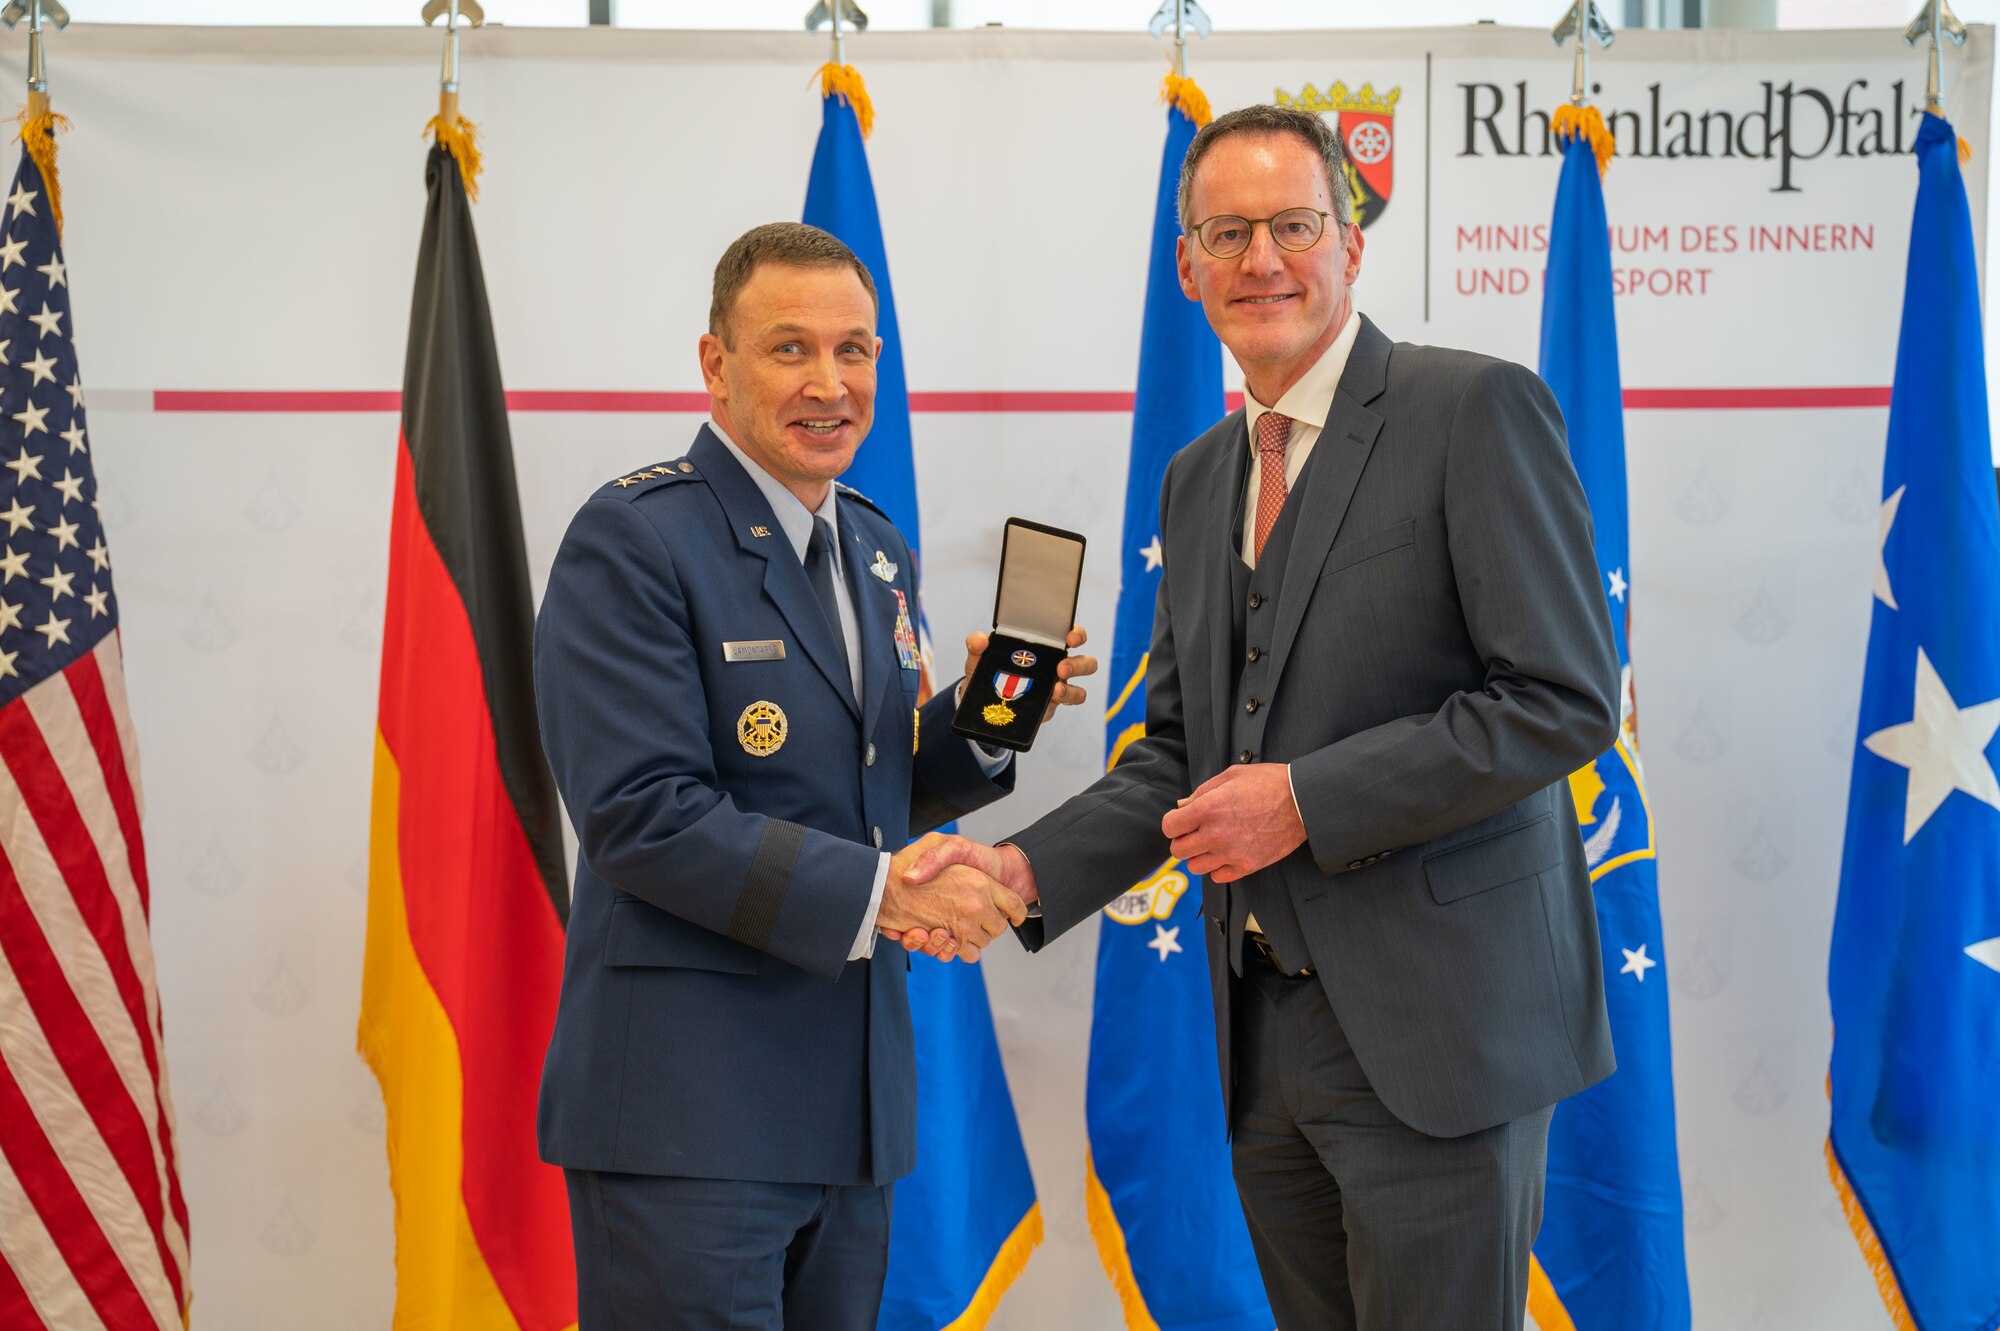 The German Ministry of the Interior and for Sports of the State of Rheinland-Pfalz received the USAFE-AFAFRICA Medal of Distinction for outstanding support of the U.S. Air Force in Germany.